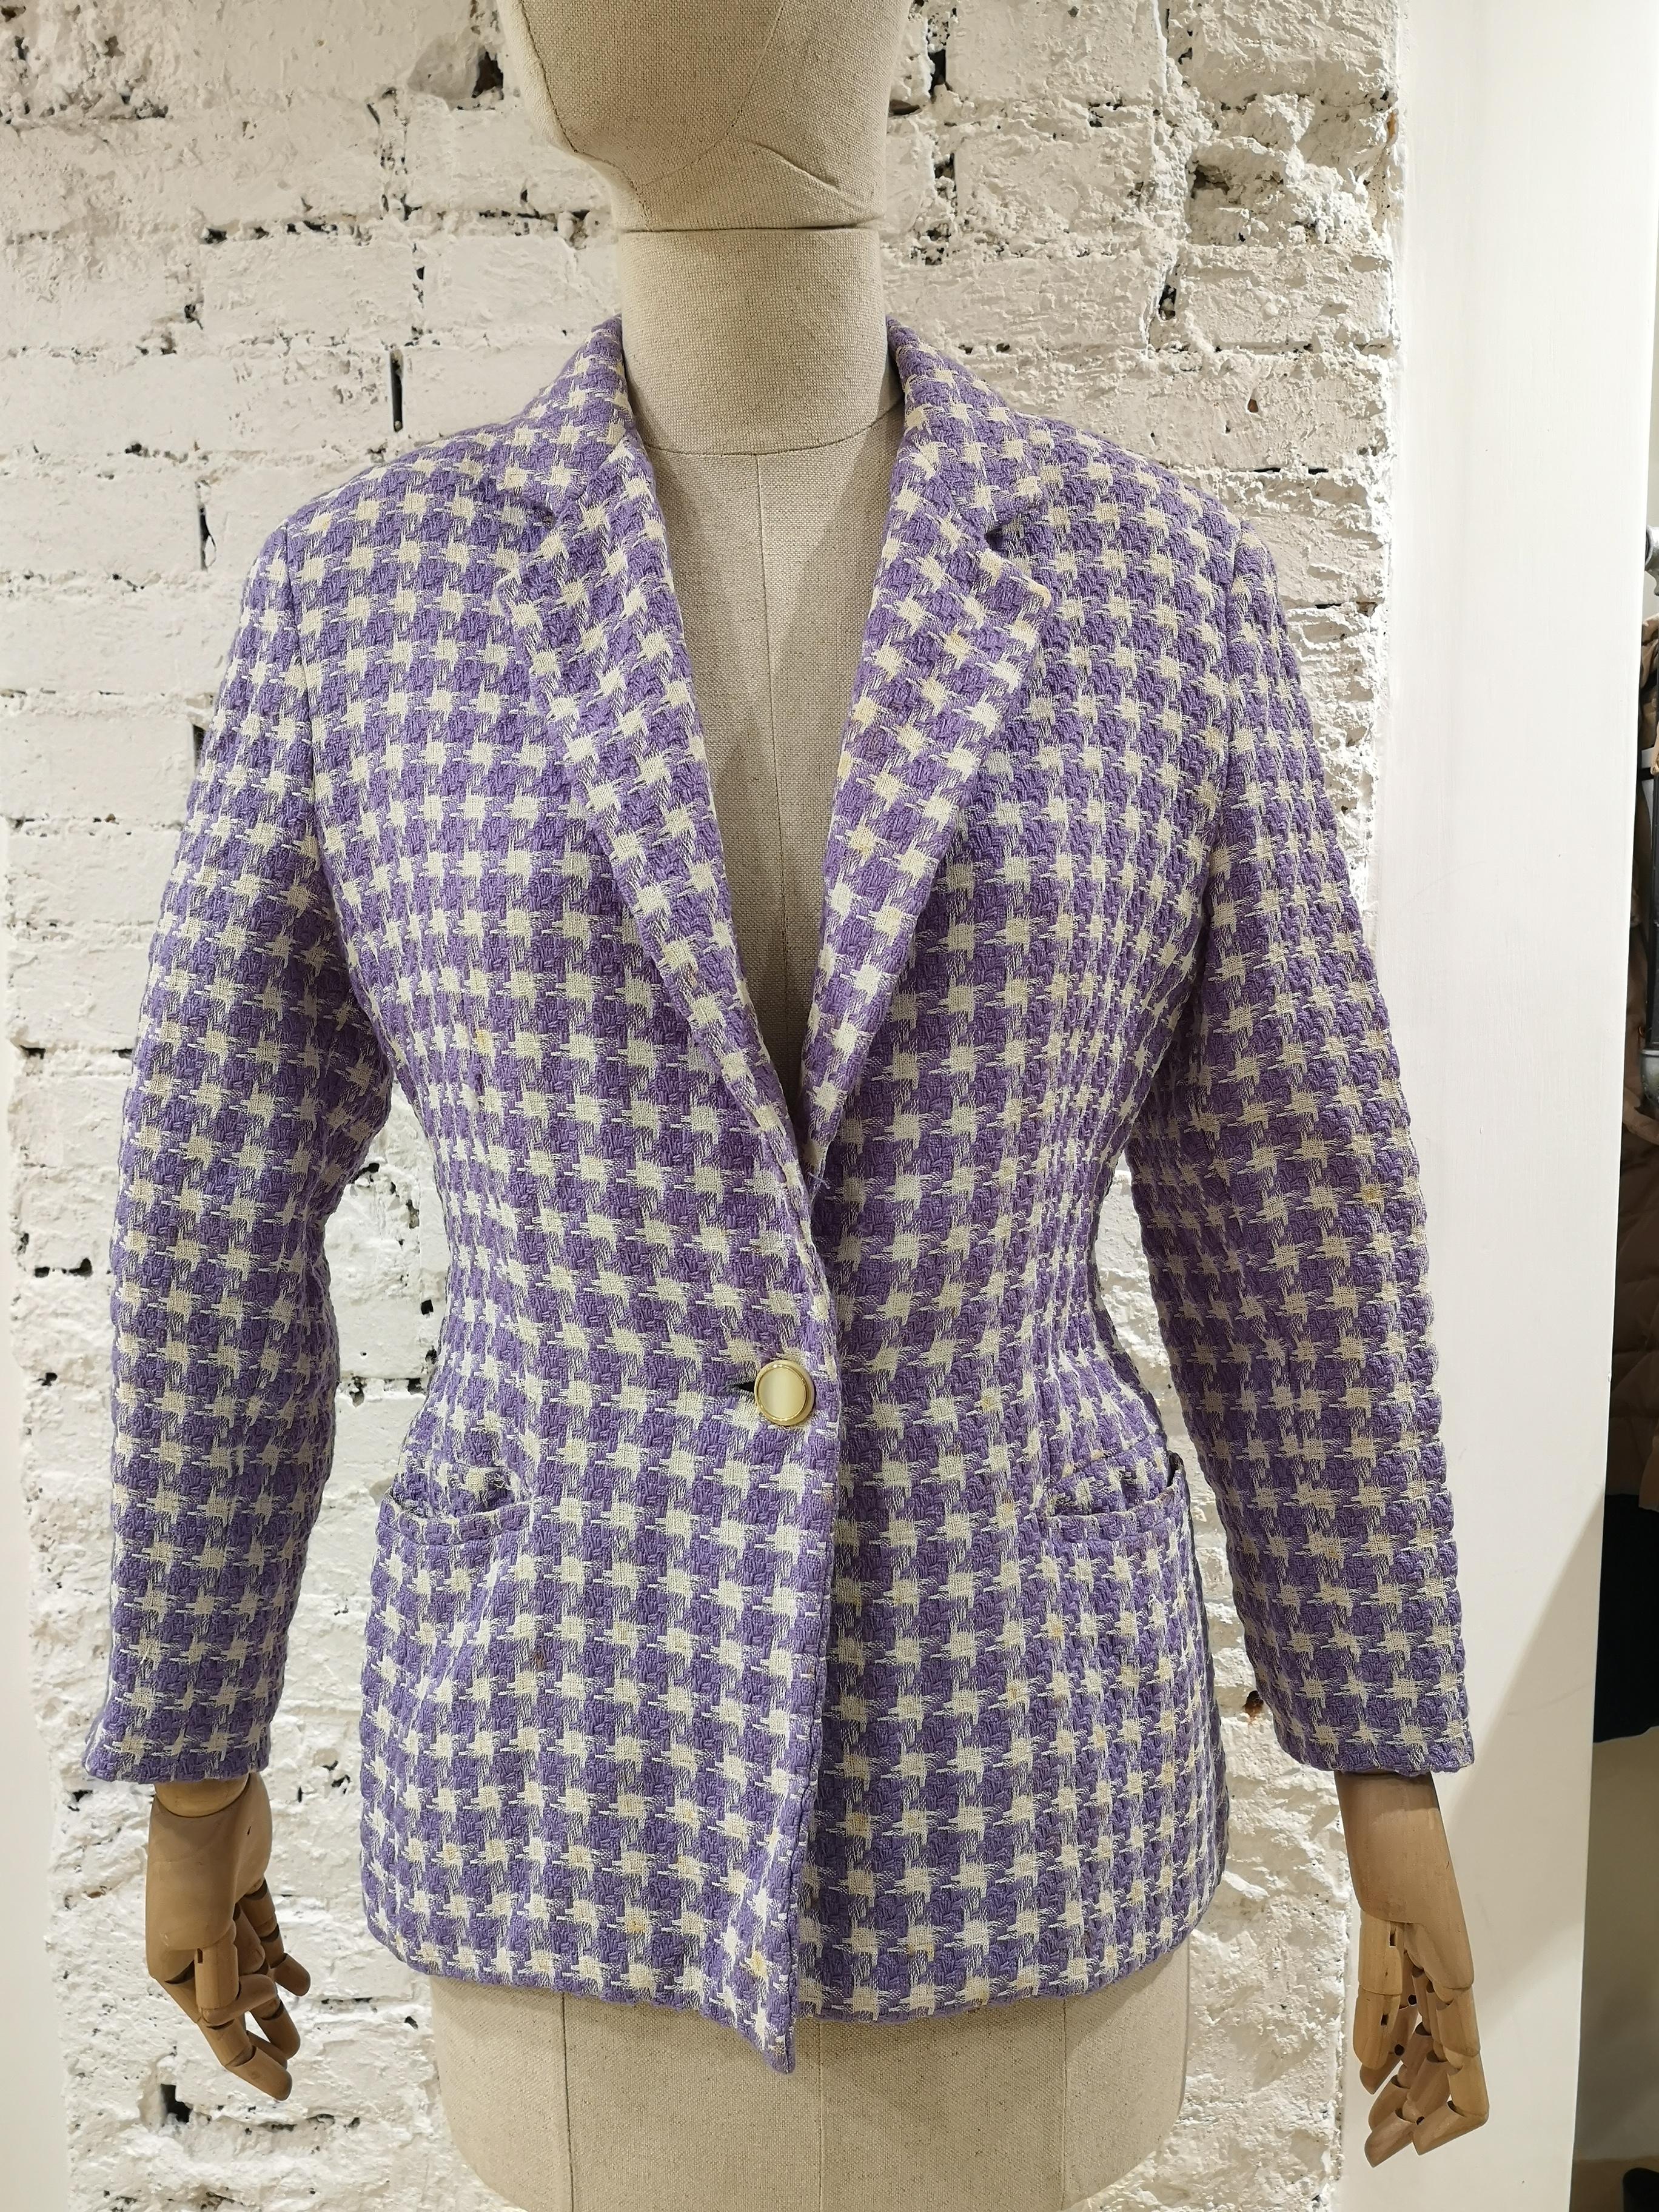 Byblos light purple and white wool jacket
byblos jacket made of wool and viscose
light purple and white some yellow signs 
size 42